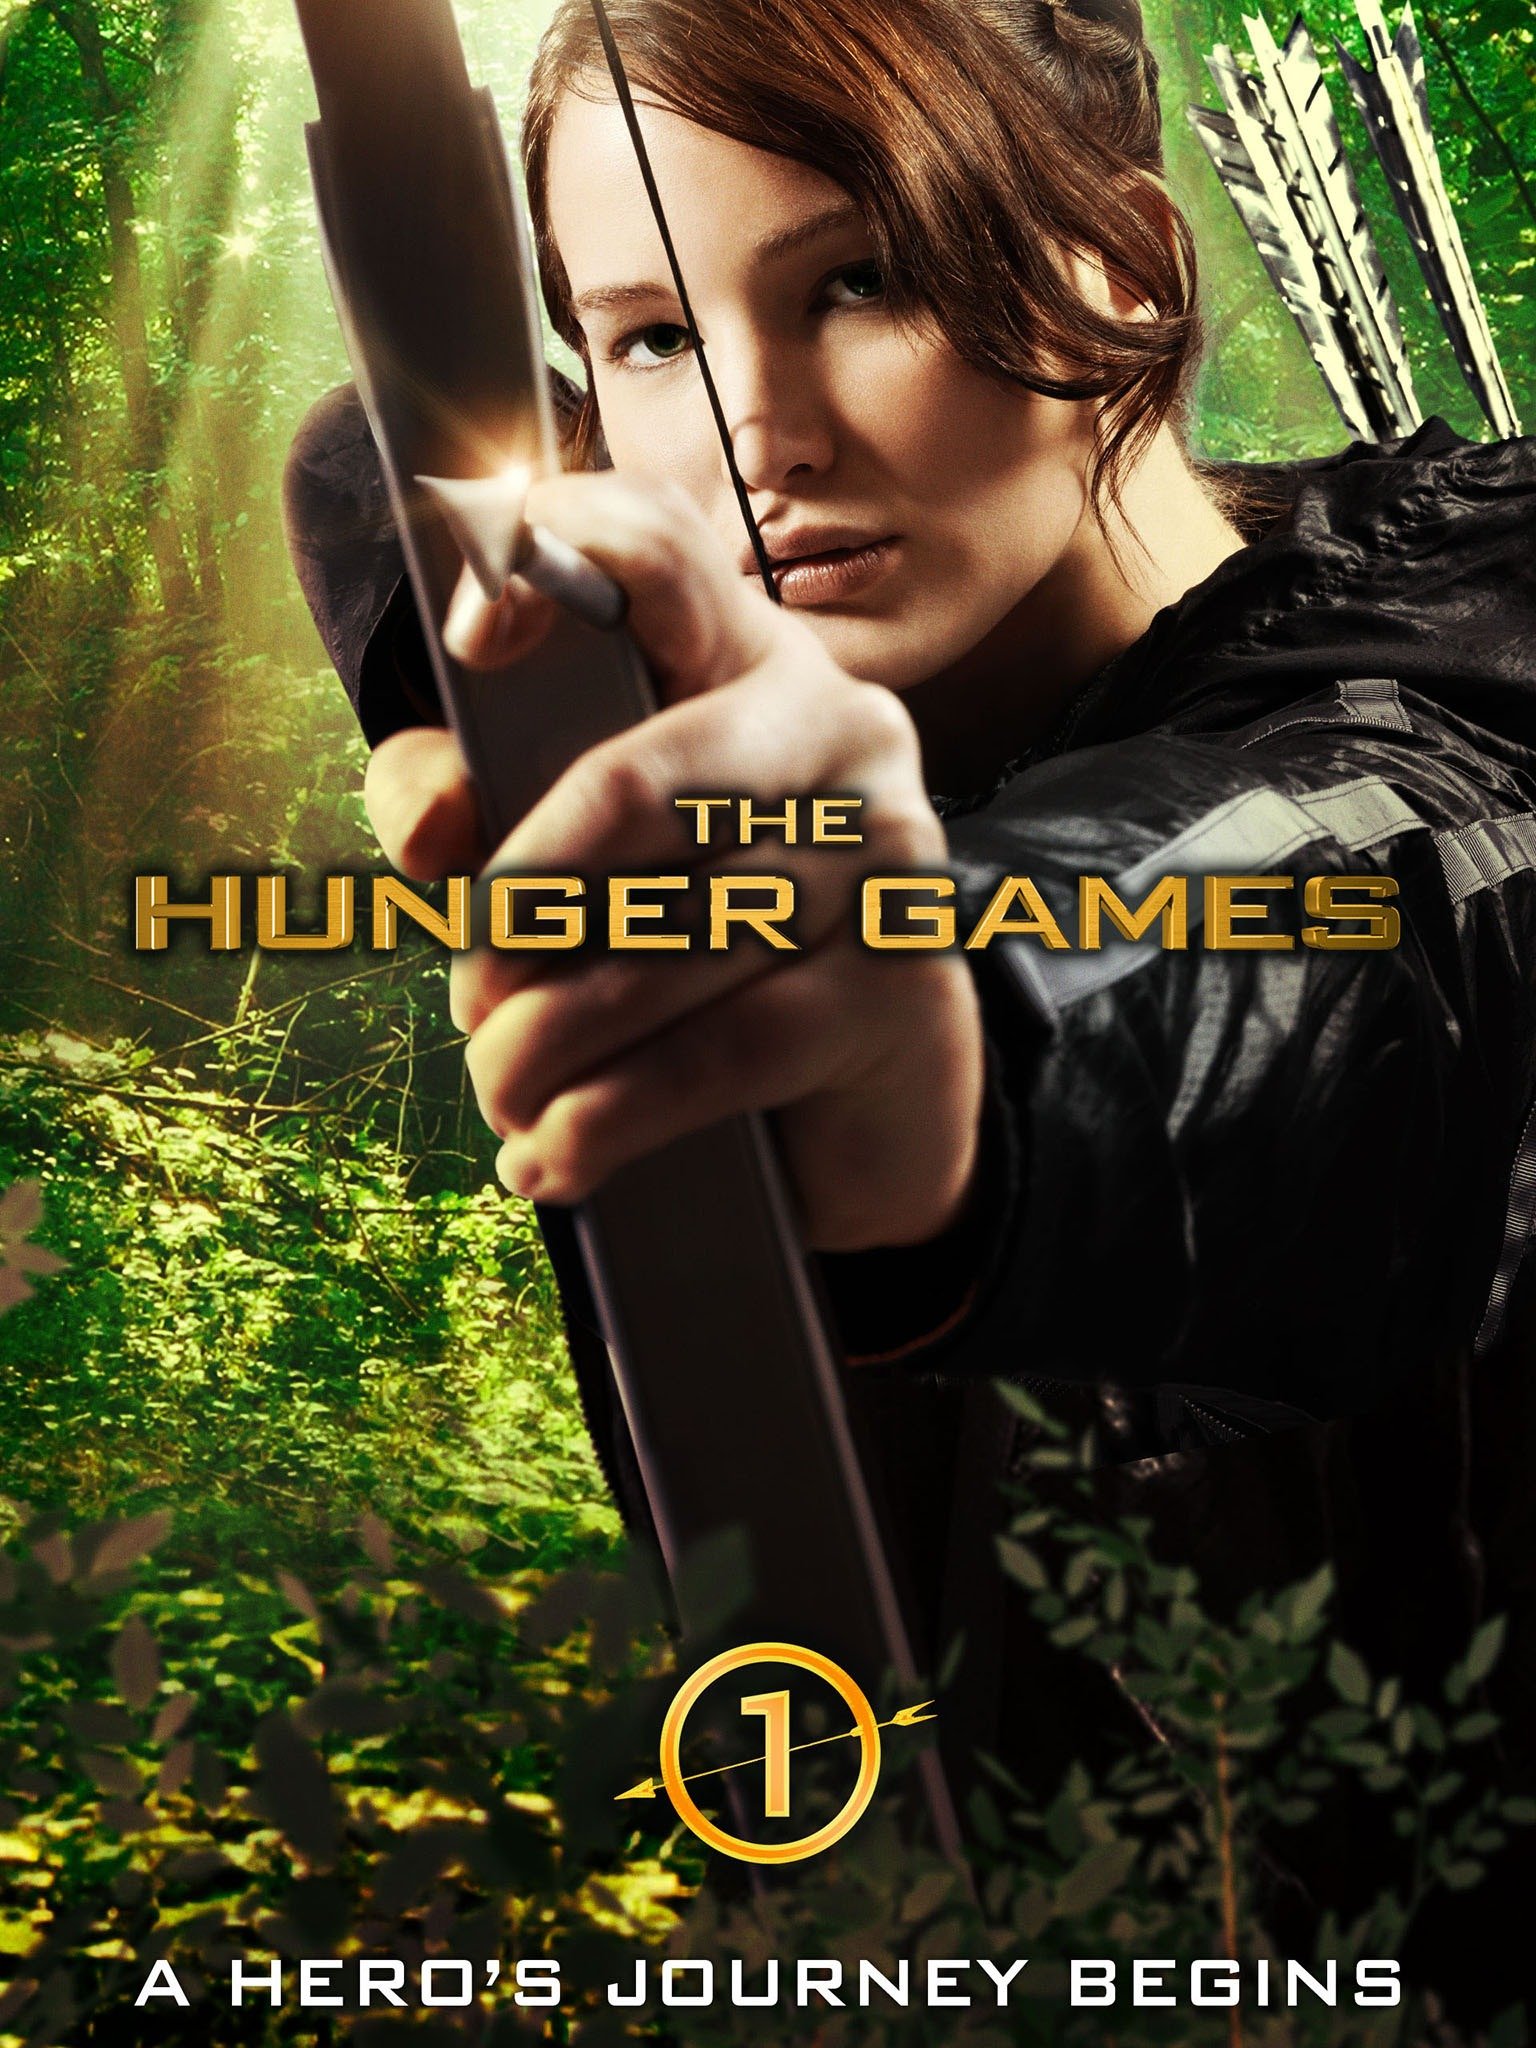 The Hunger Games Movie Reviews